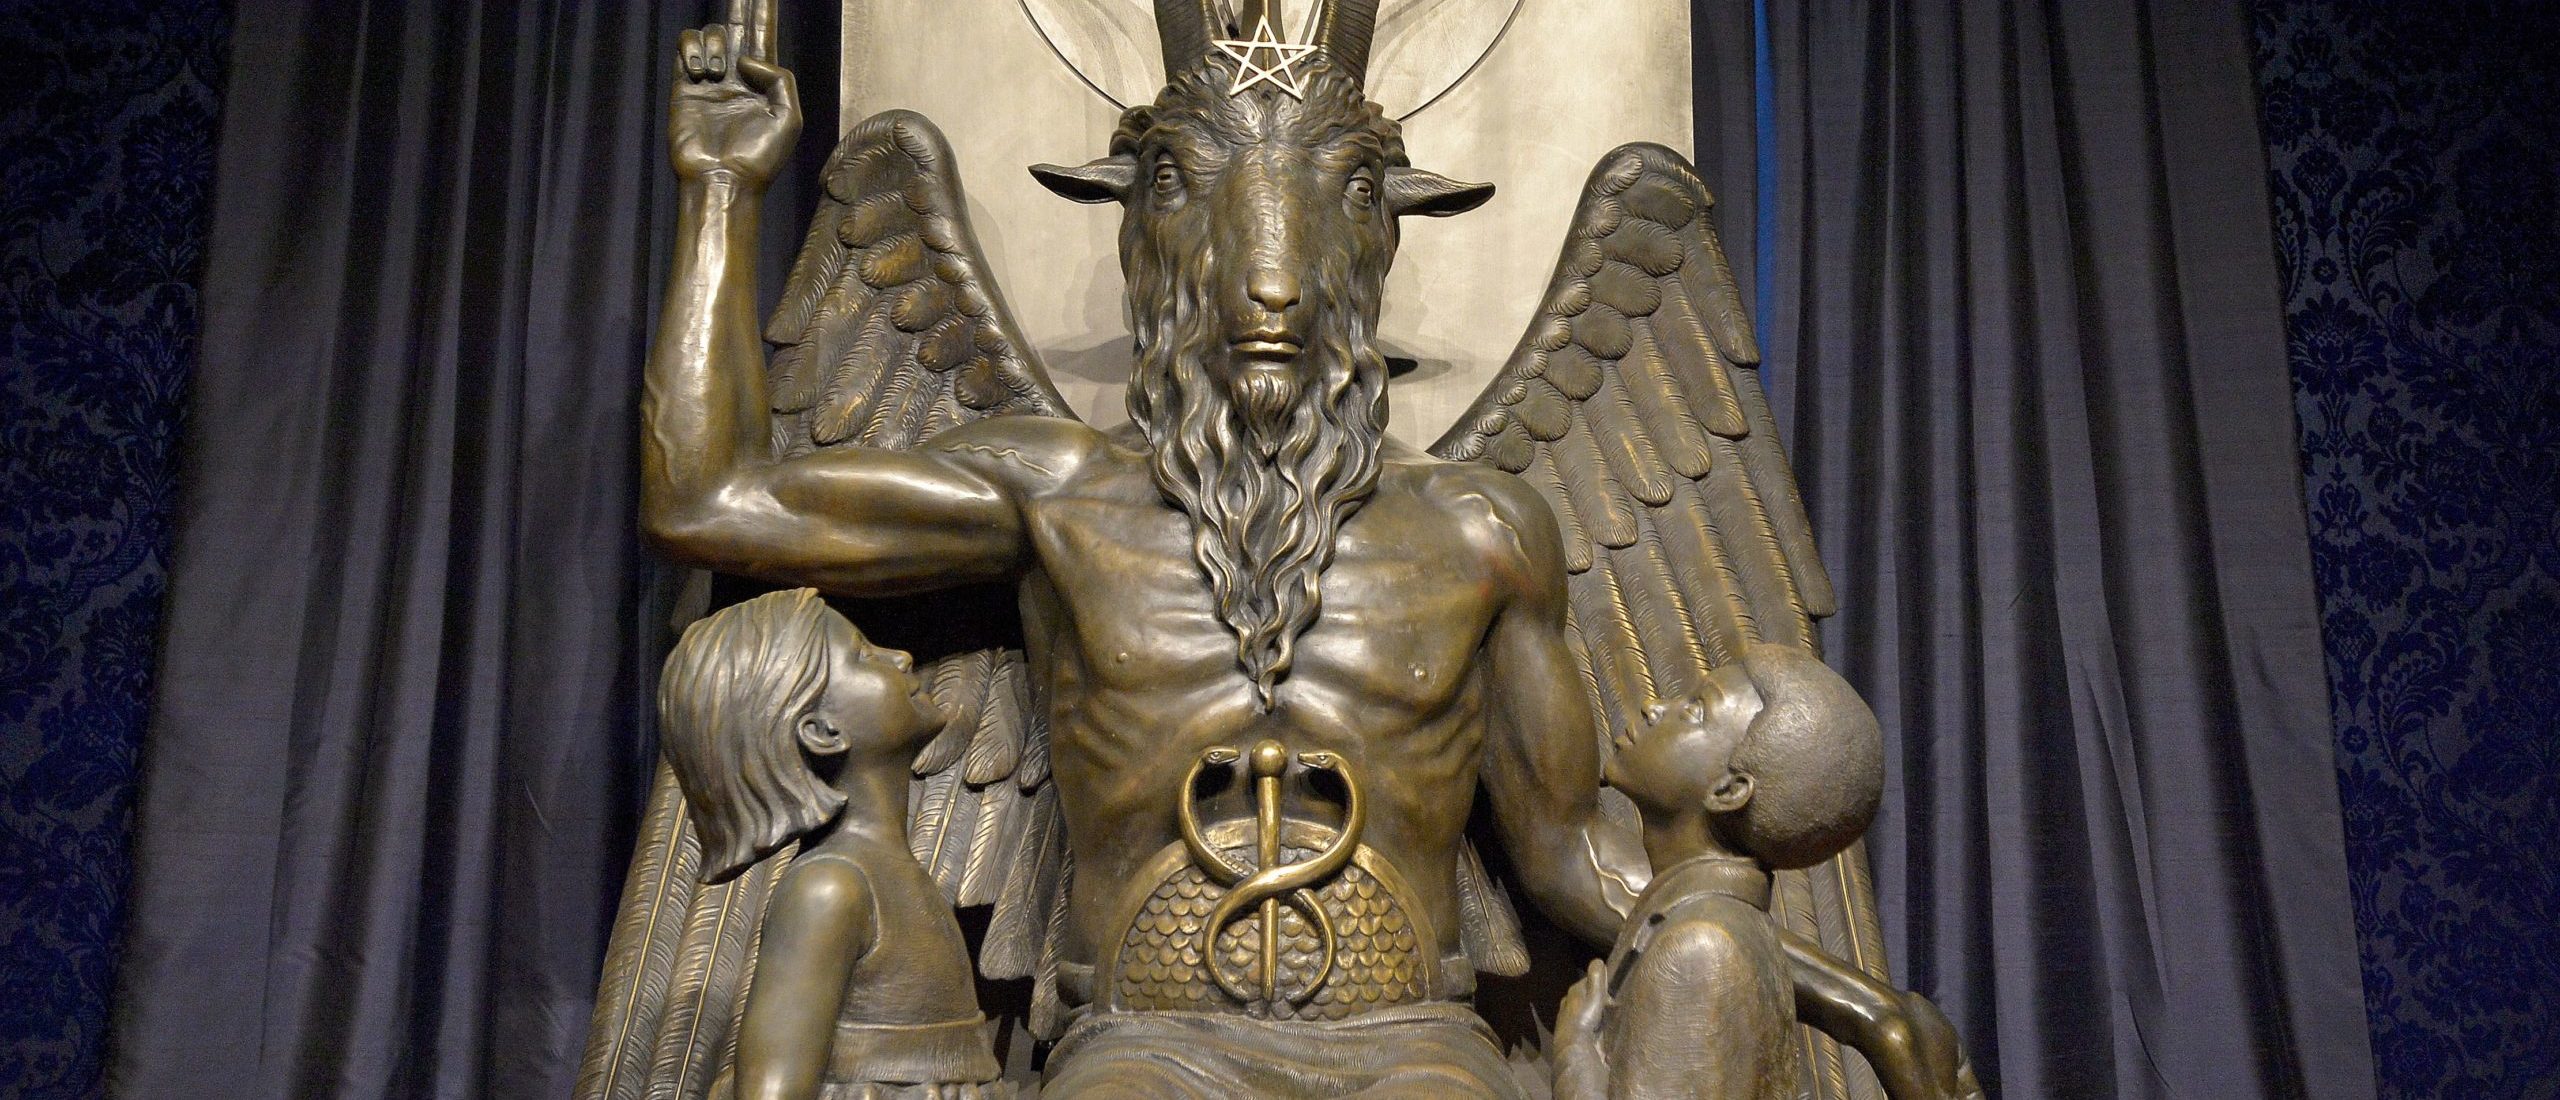 The Baphomet statue is seen in the conversion room at the Satanic Temple where a "Hell House" is being held in Salem, Massachusett on October 8, 2019. - The Hell House was a parody on a Christian Conversion centre meant to scare atheist and other Satanic Church members. (Photo by Joseph Prezioso / AFP) (Photo by JOSEPH PREZIOSO/AFP via Getty Images)